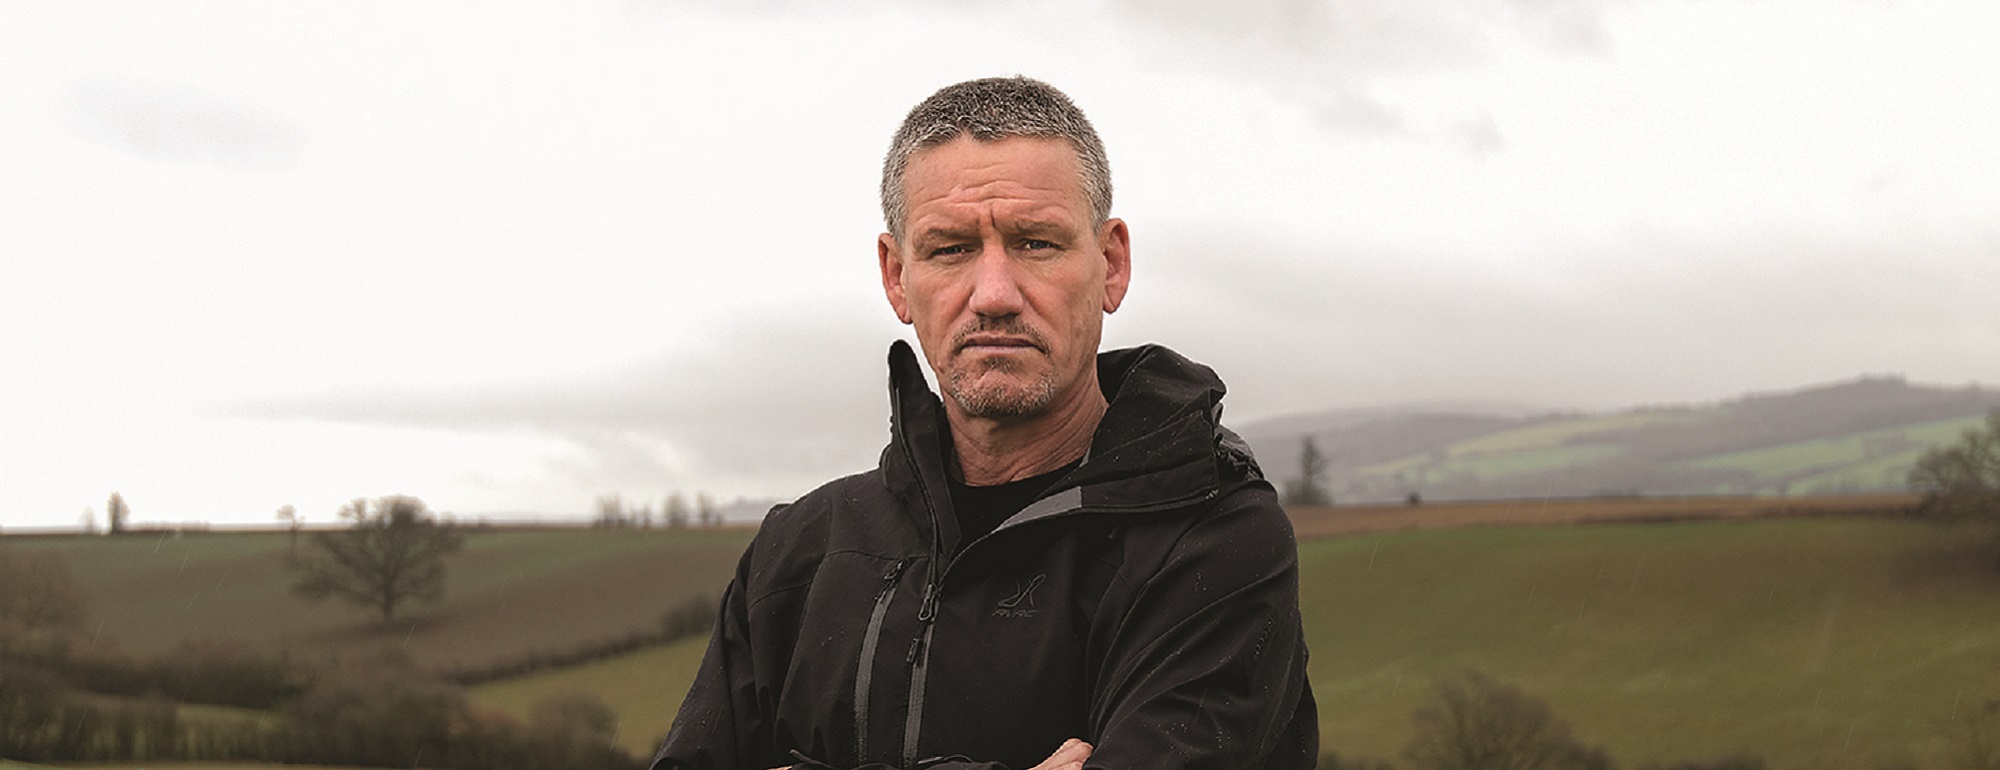 Billy Billingham standing with his arms folded in a field with hills in the background